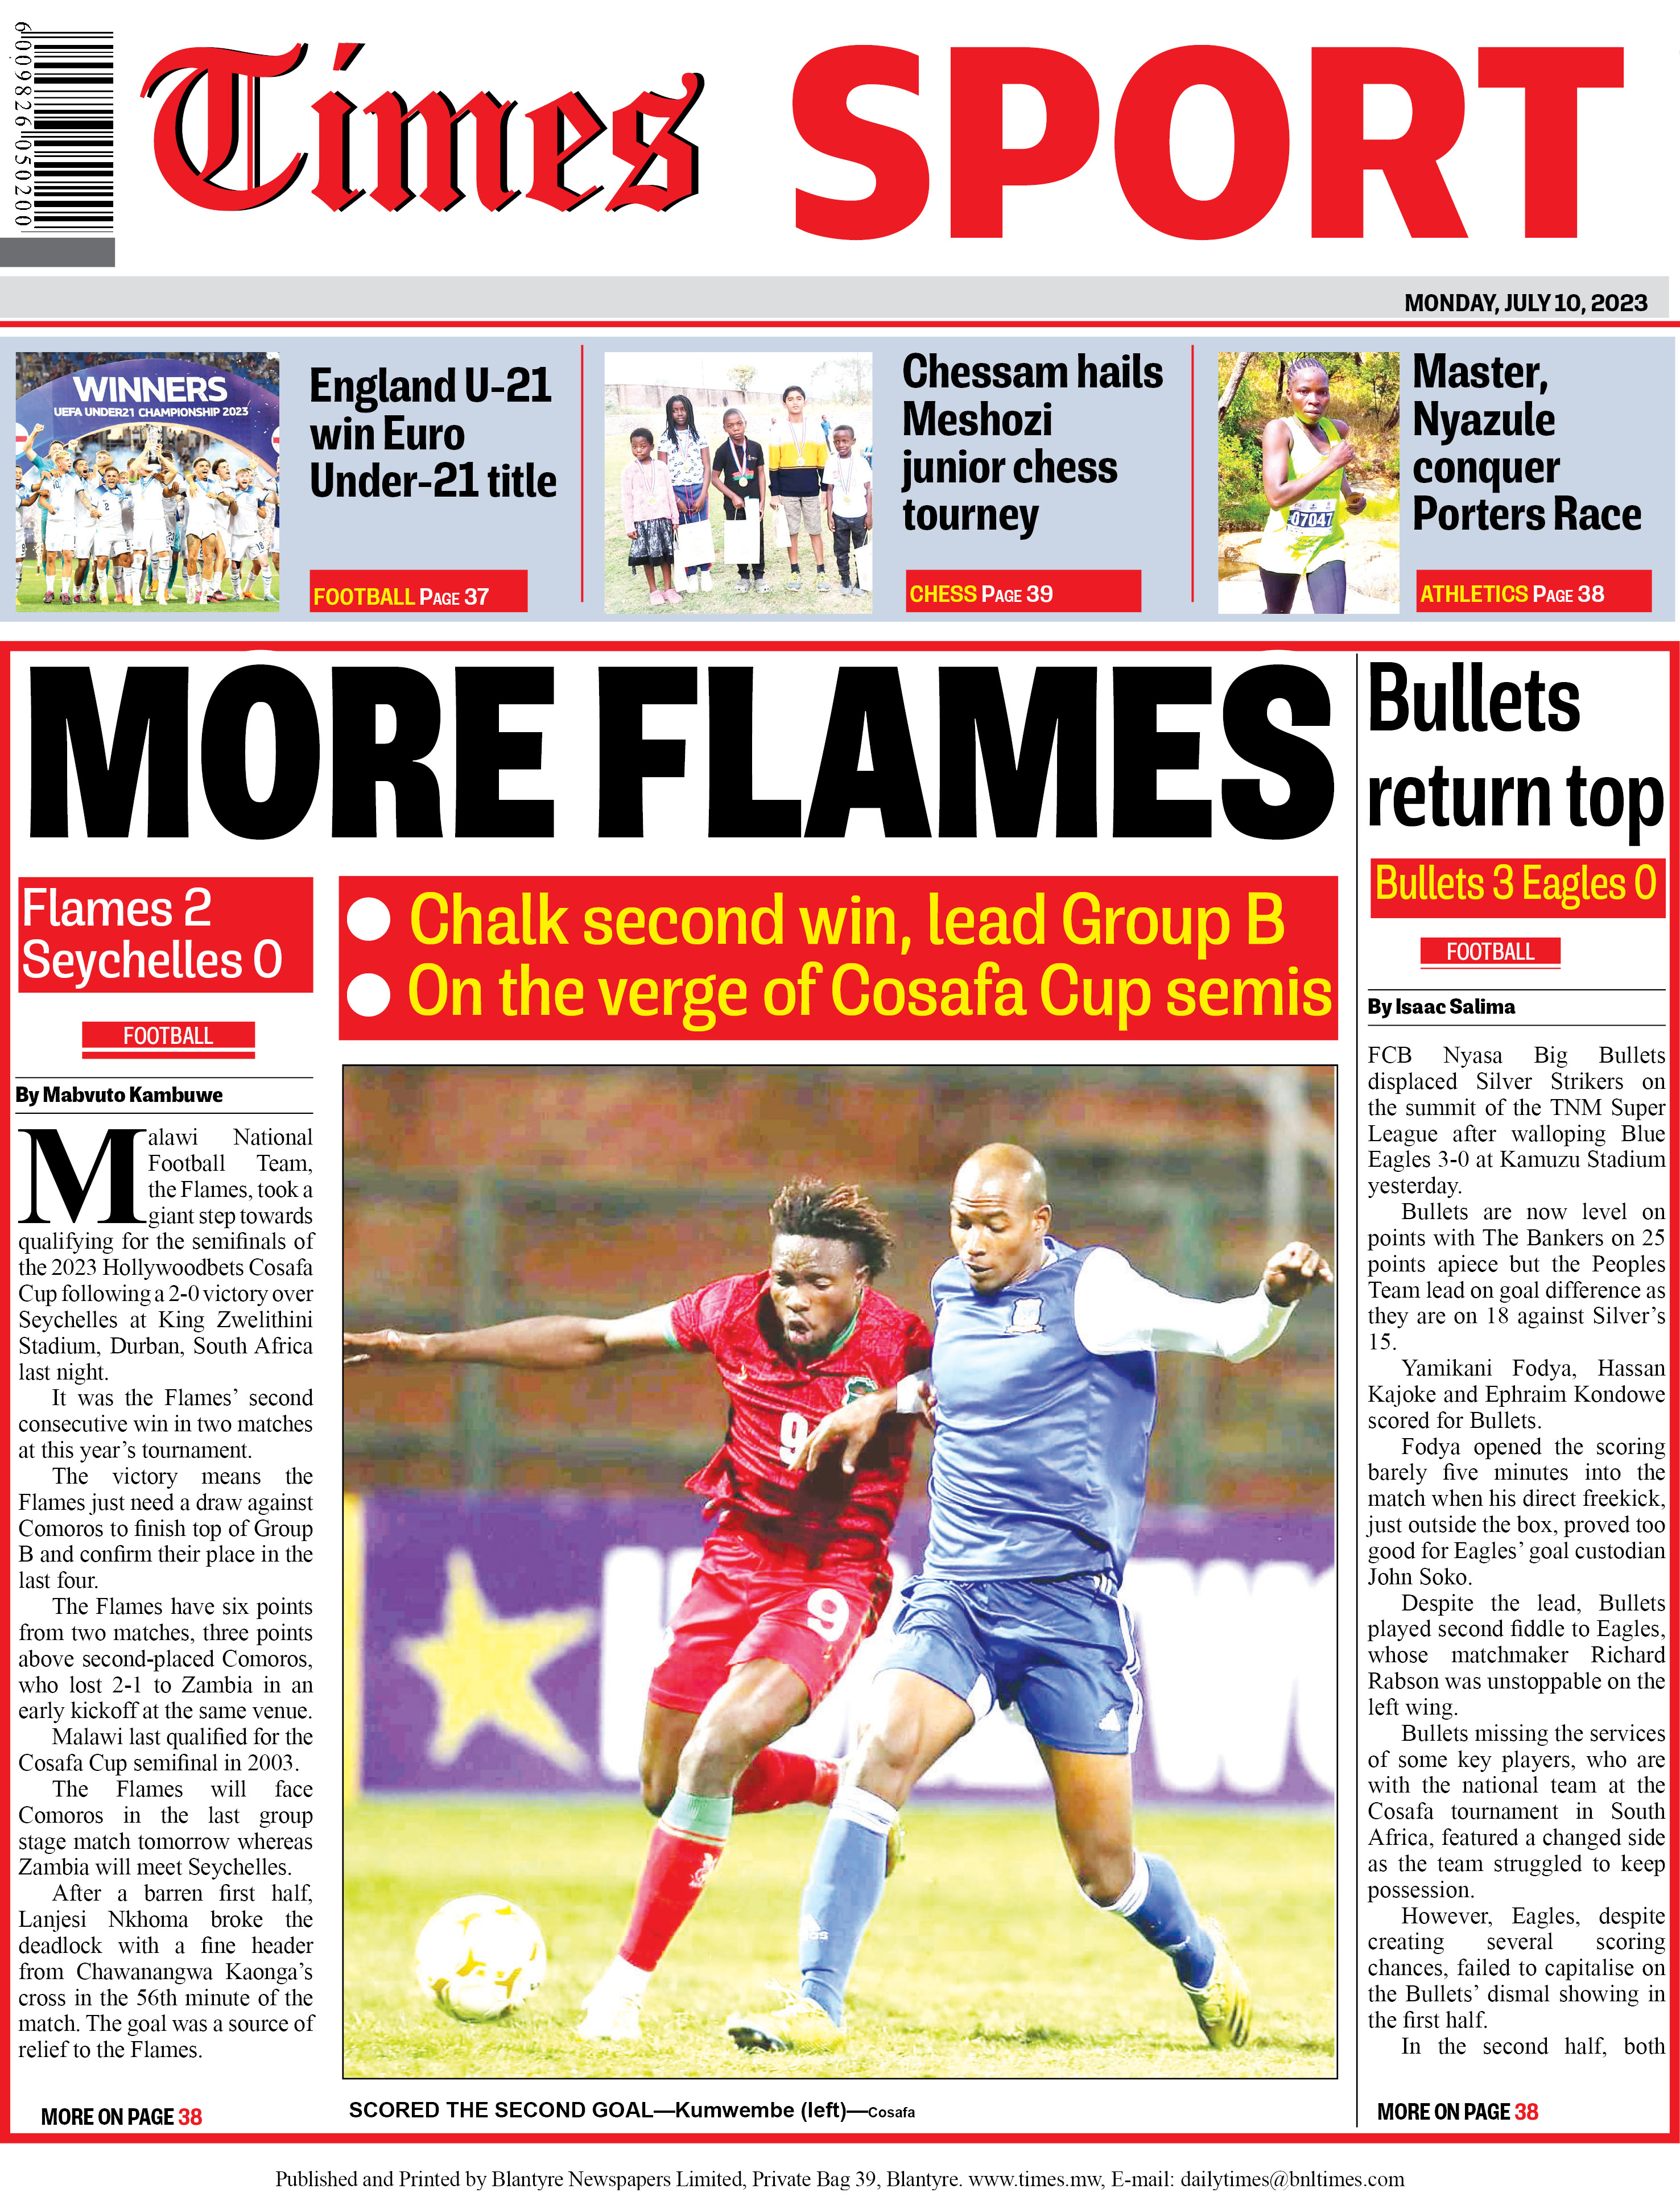 Times 360 Malawi on X: #TheDailyTimes back page: Malawi National Football  Team took a giant step towards qualifying for the semifinals of the 2023  Hollywoodbets Cosafa Cup following a 2-0 victory over